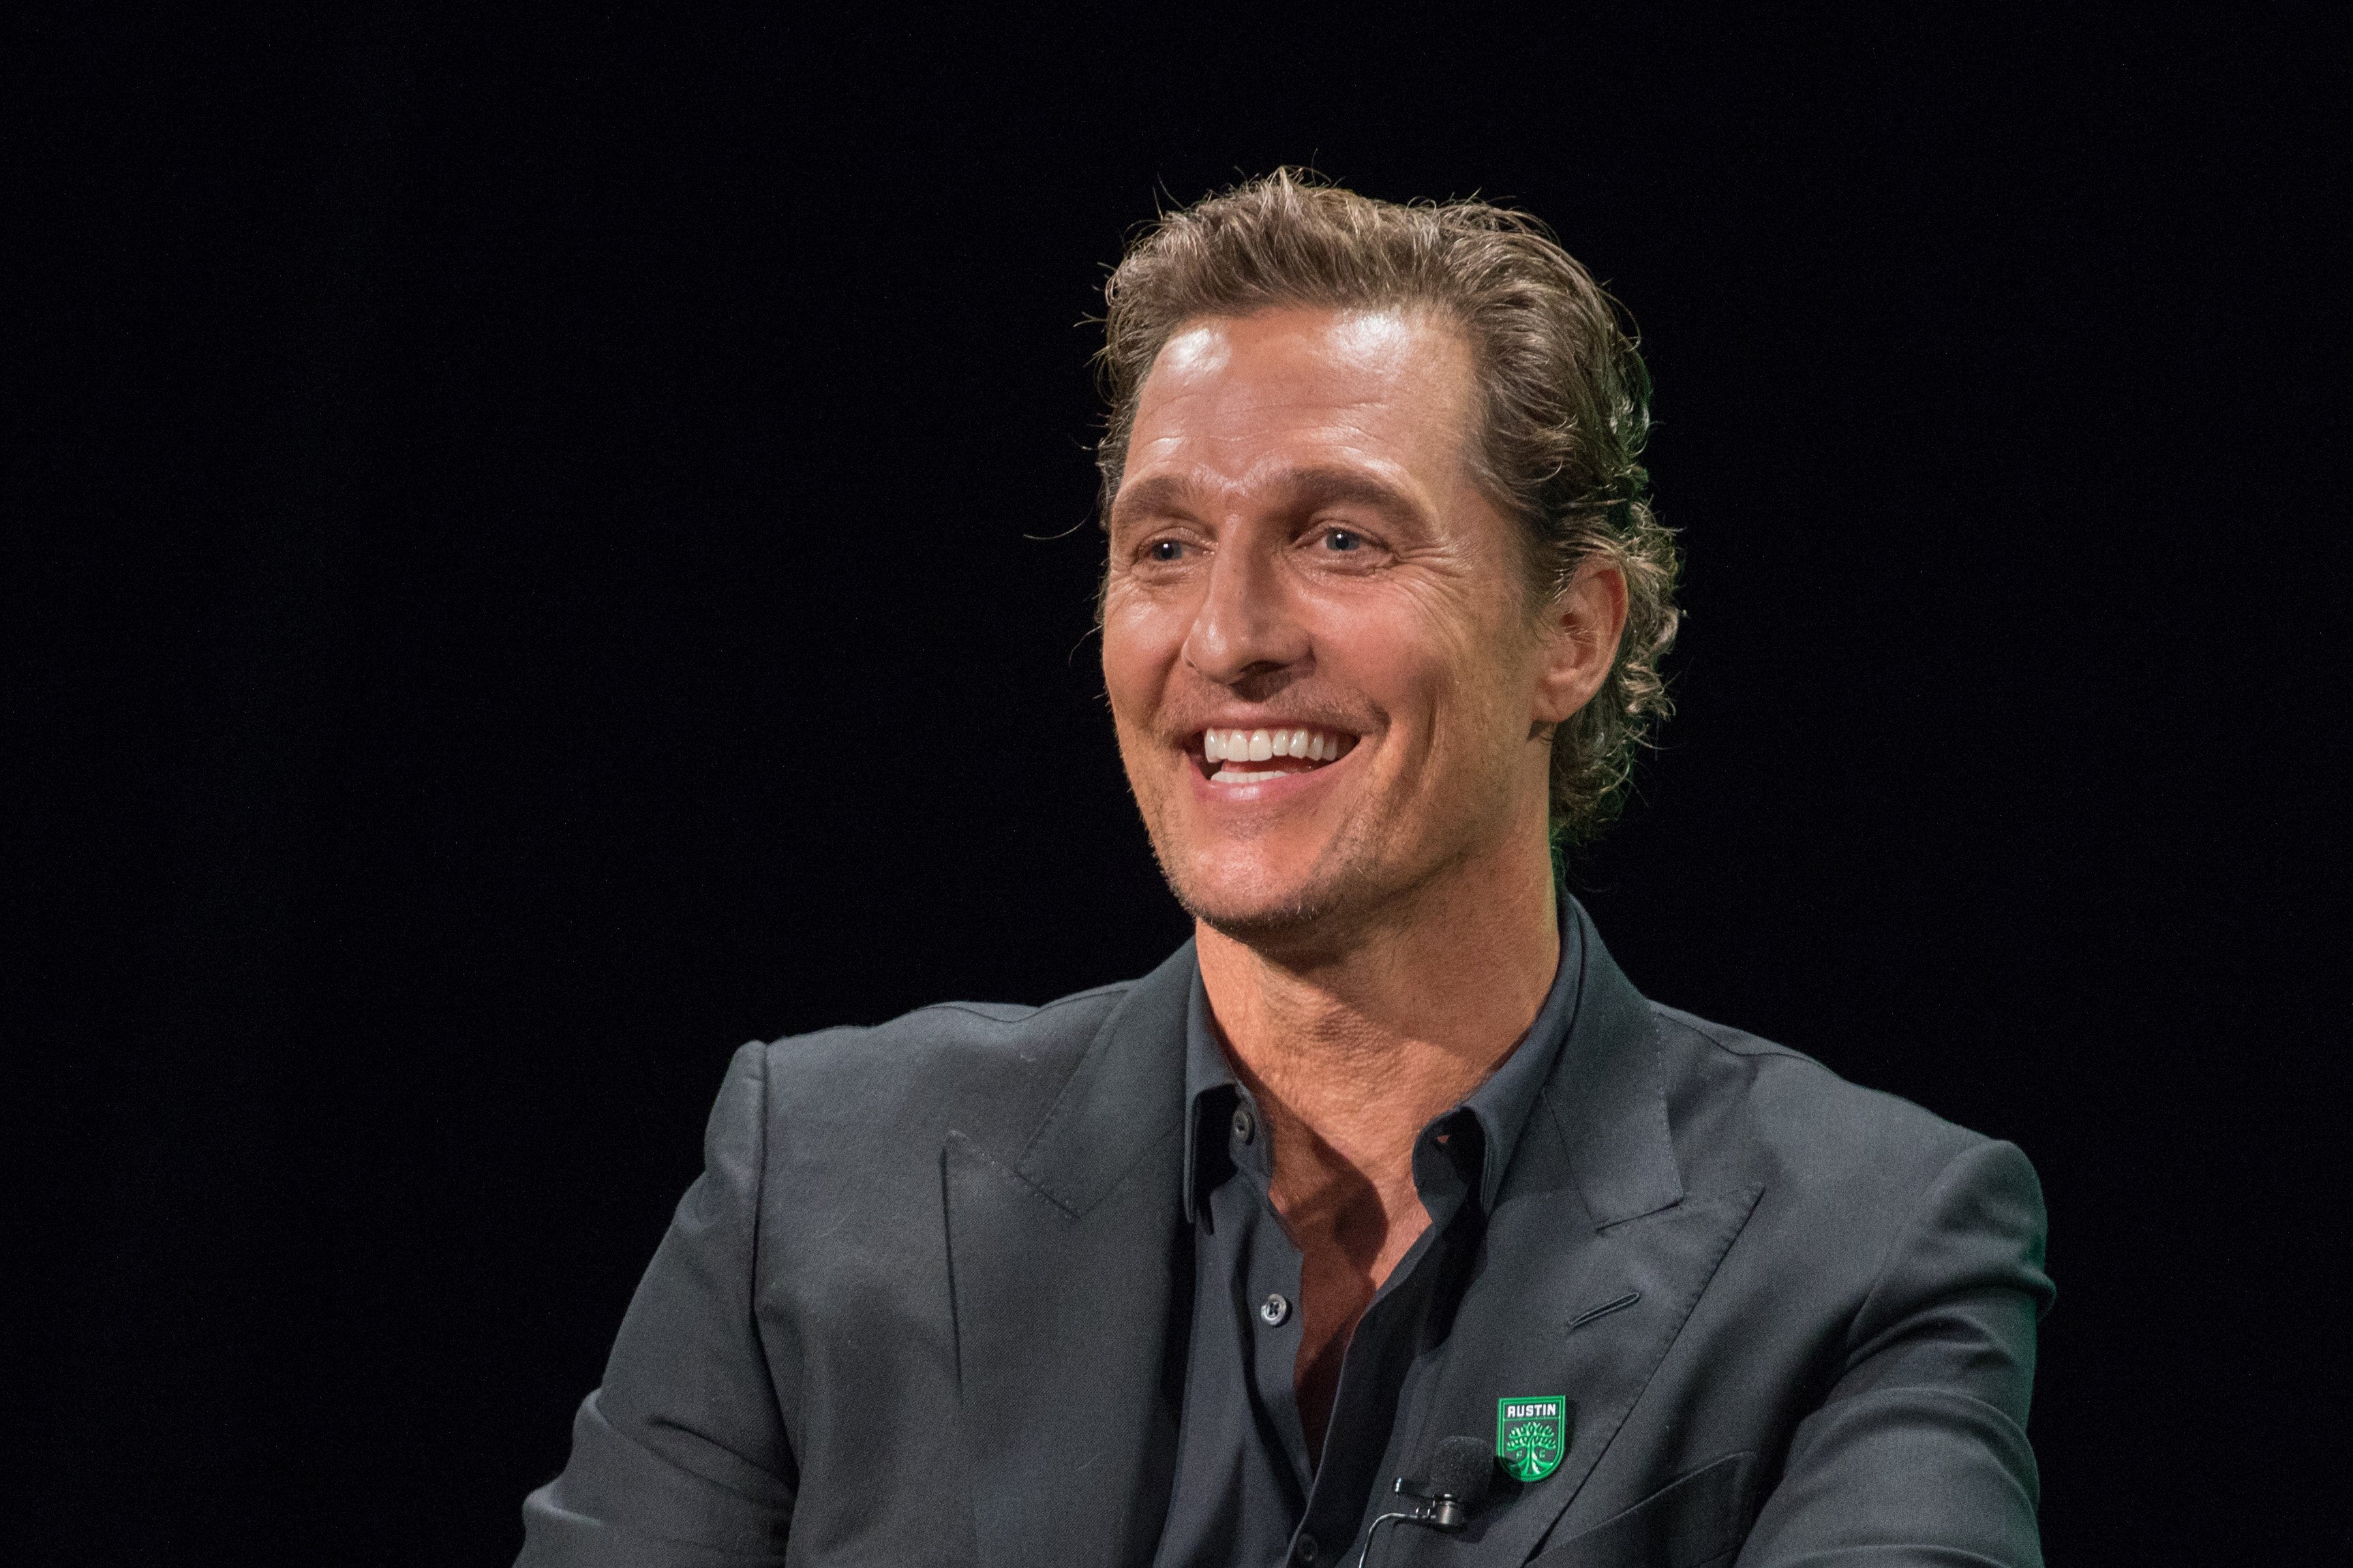 Matthew McConaughey attending the Austin FC Major League Soccer Club on August 23, 2019 in Austin, Texas.  | Source: Getty Images